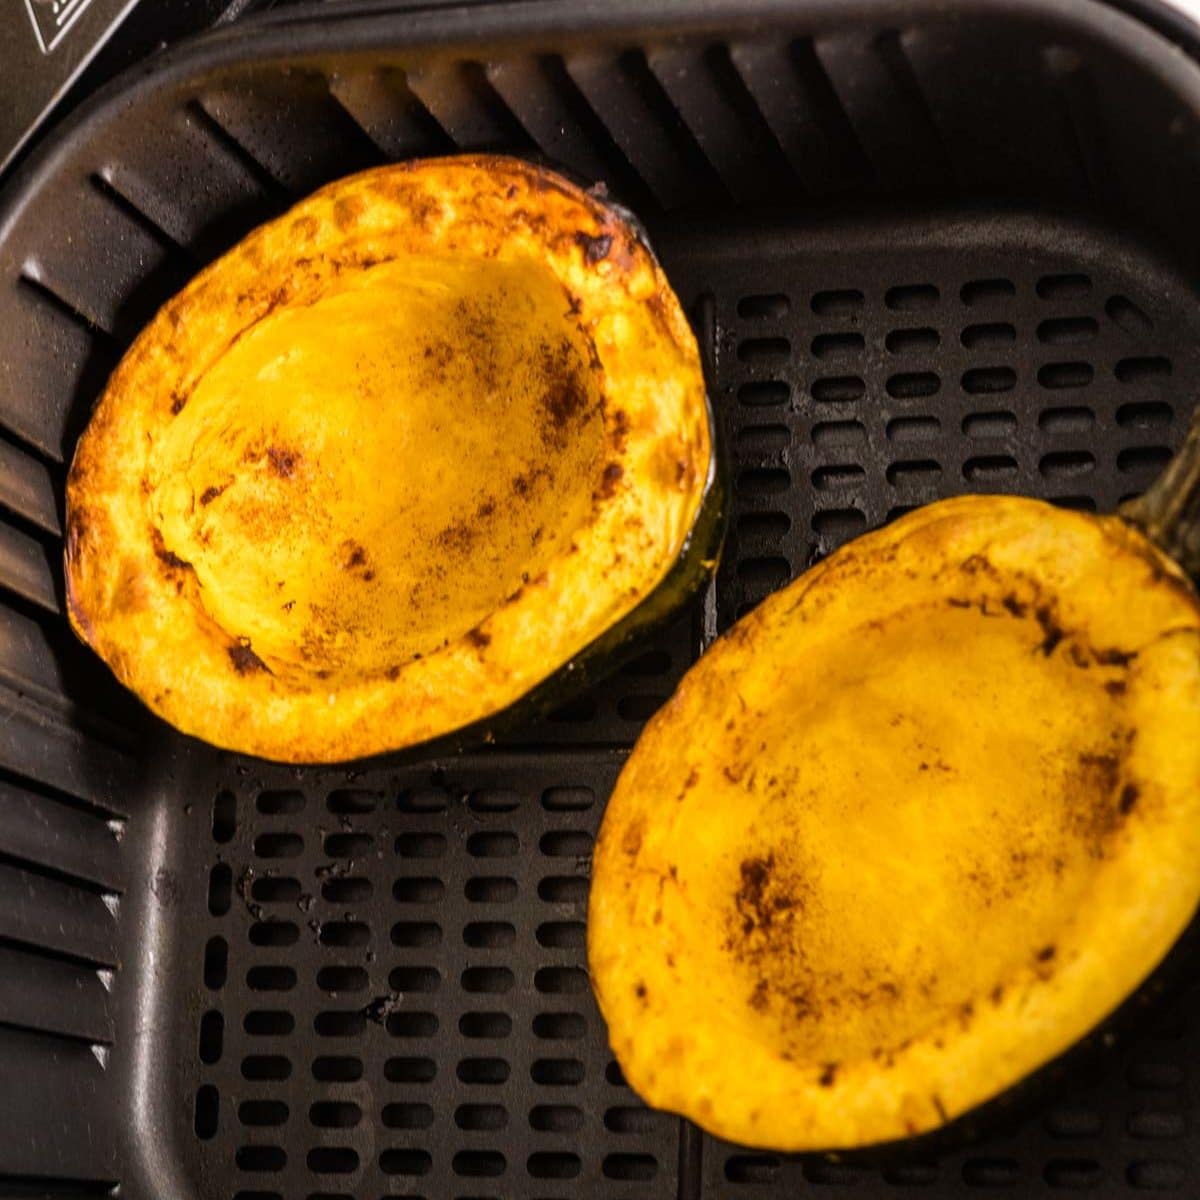 Acorn squash after air frying with some of the insides scooped up on a fork.